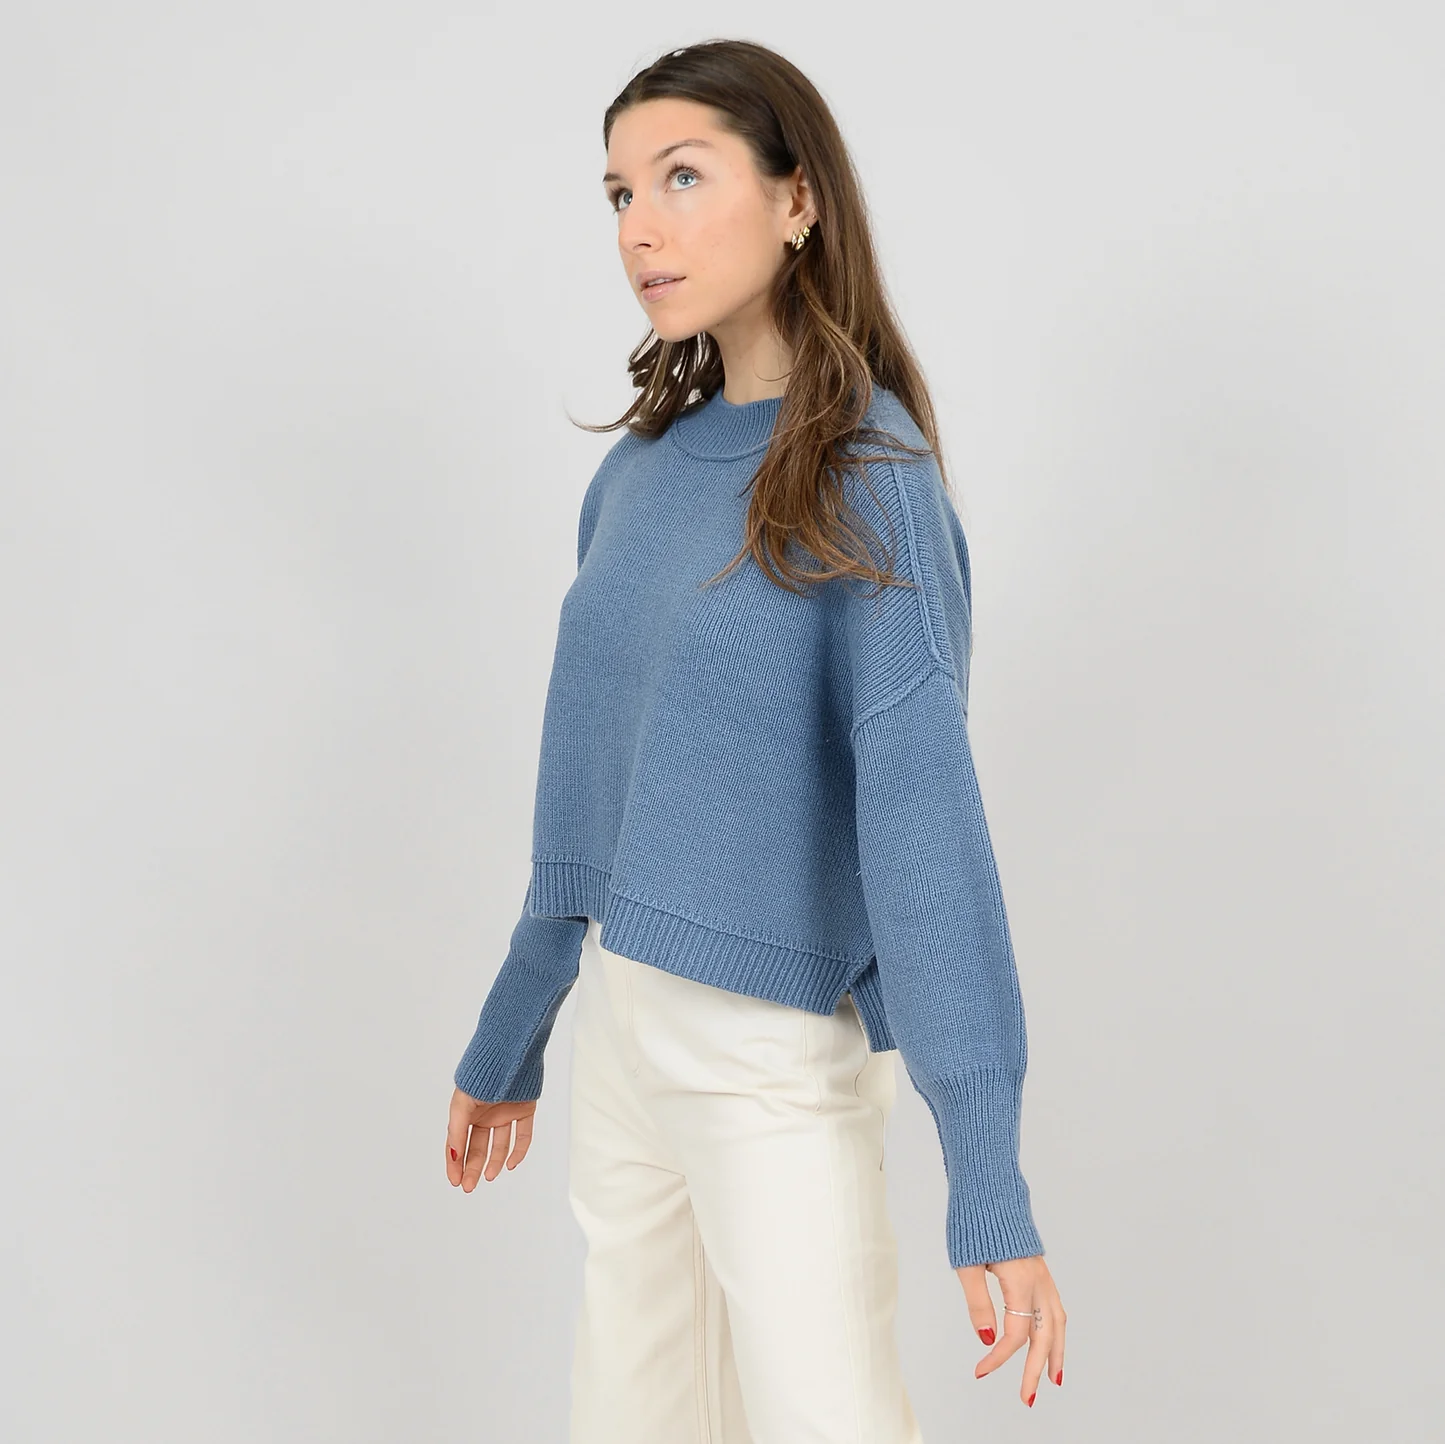 The Sumire Long Sleeve Crew Neck Pull-Over In Coronet Blue